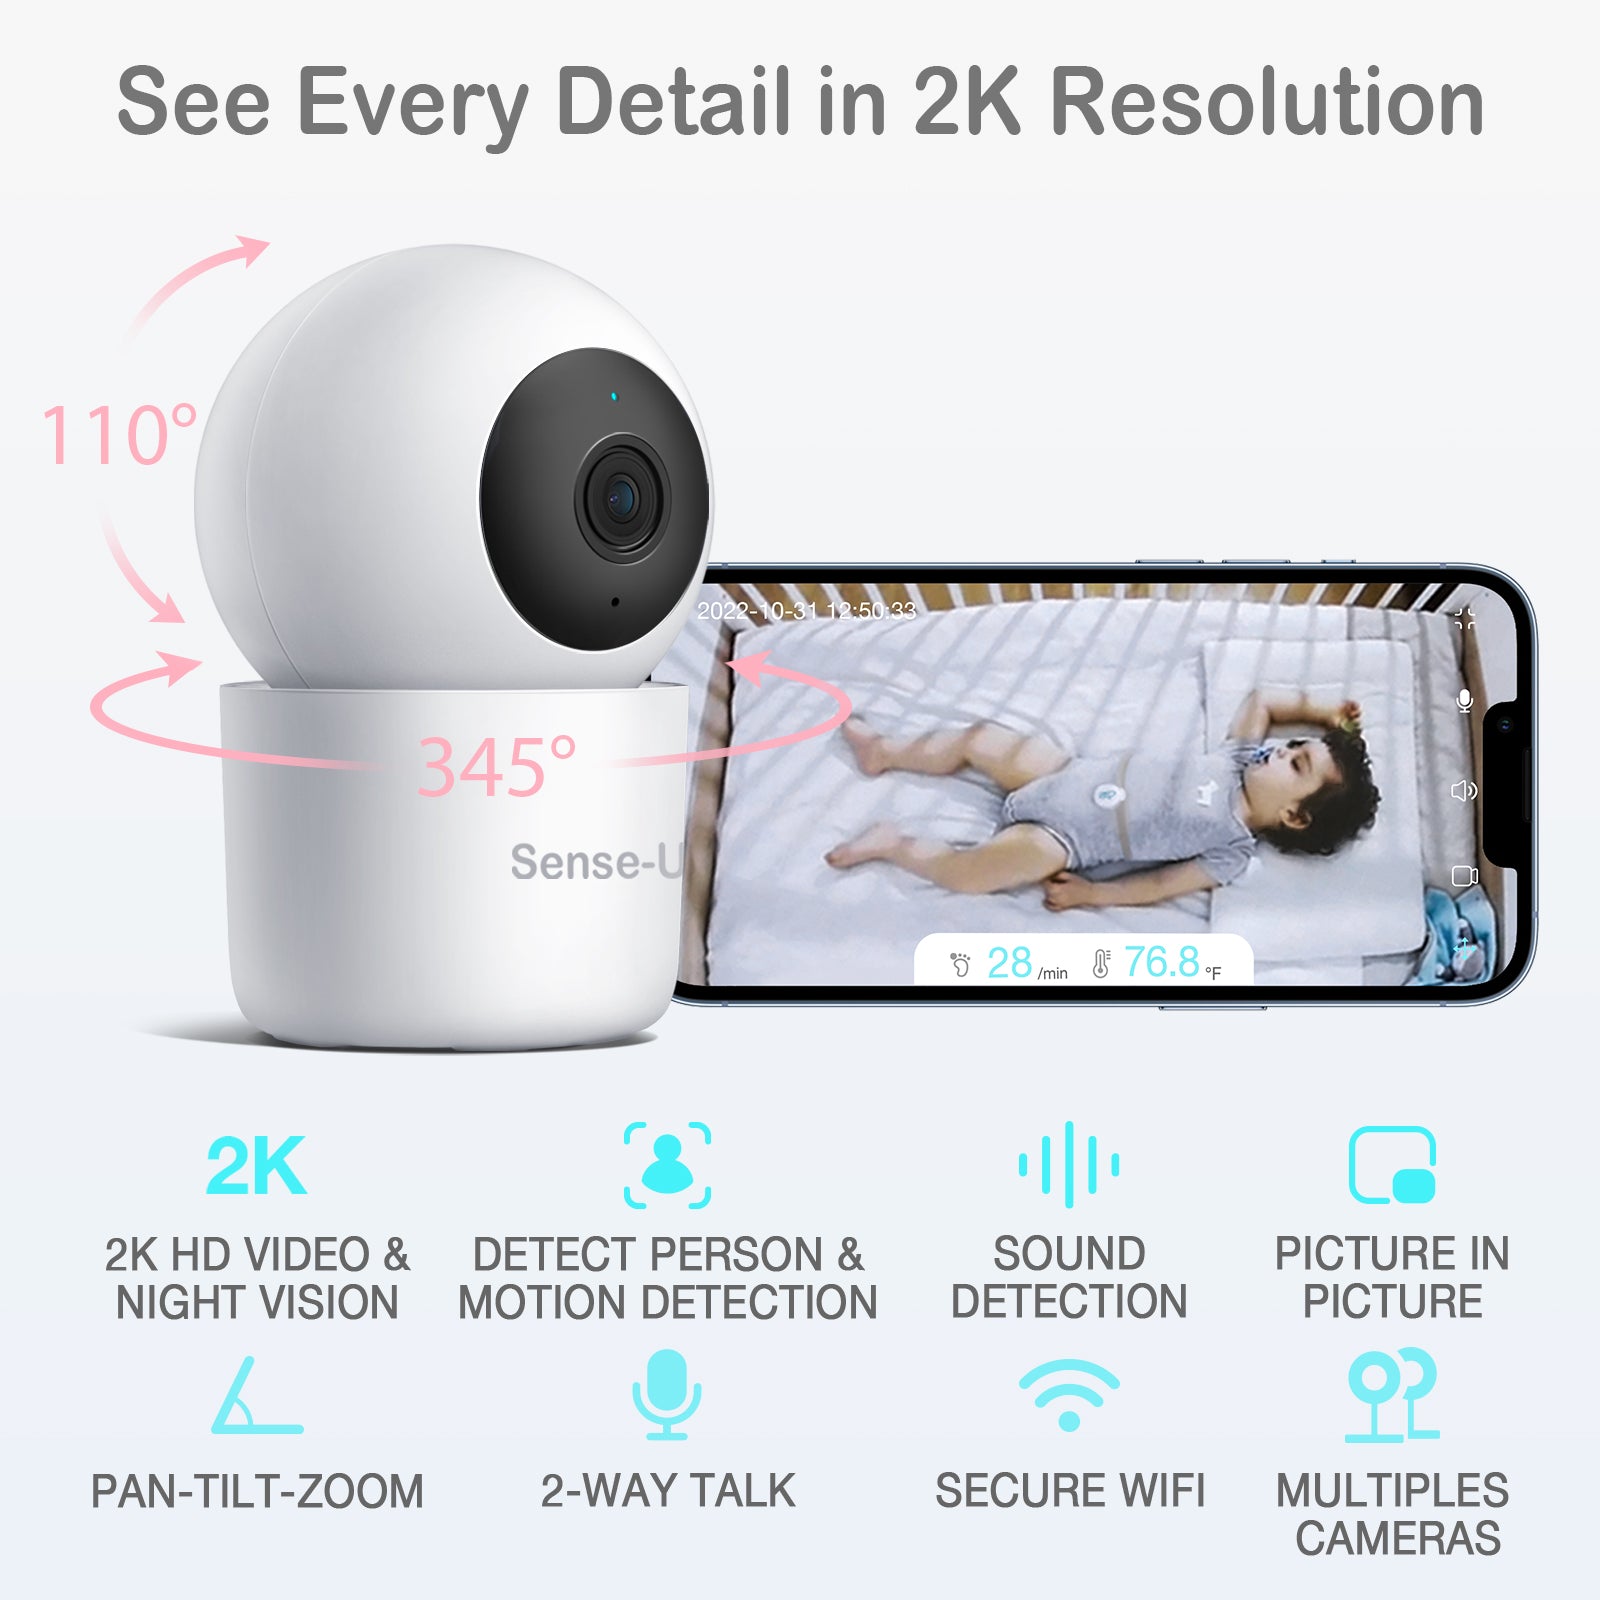 Sense-U Bundle: Know your child is okay while streaming HD video 